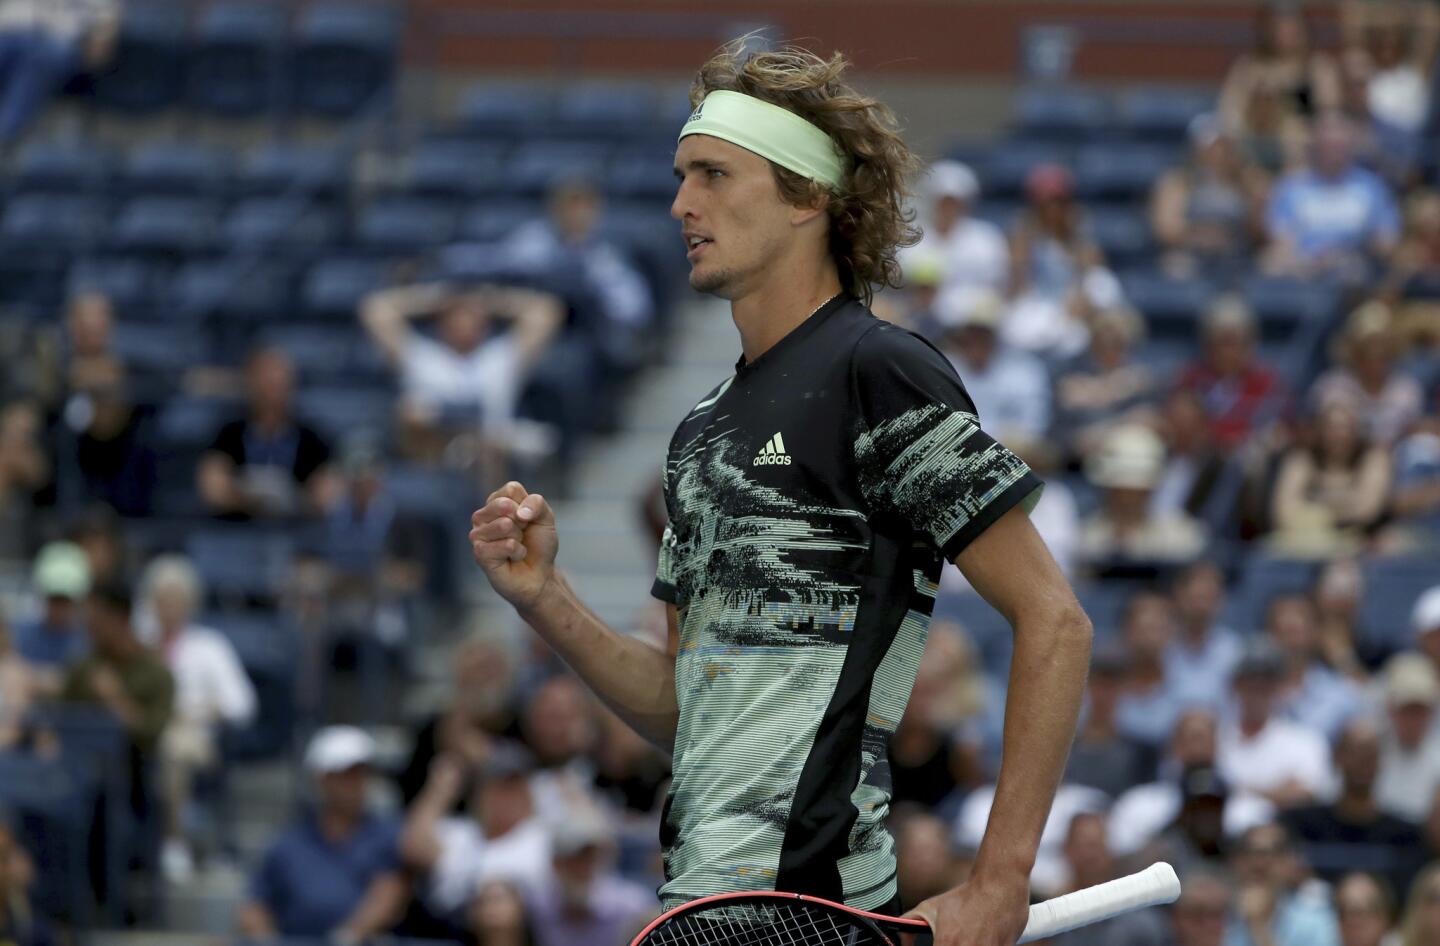 Alexander Zverev reacts after scoring a point against Frances Tiafoe during the second round match on Day 4 of the 2019 U.S. Open at the USTA Billie Jean King National Tennis Center on Aug.29, 2019, in Queens.